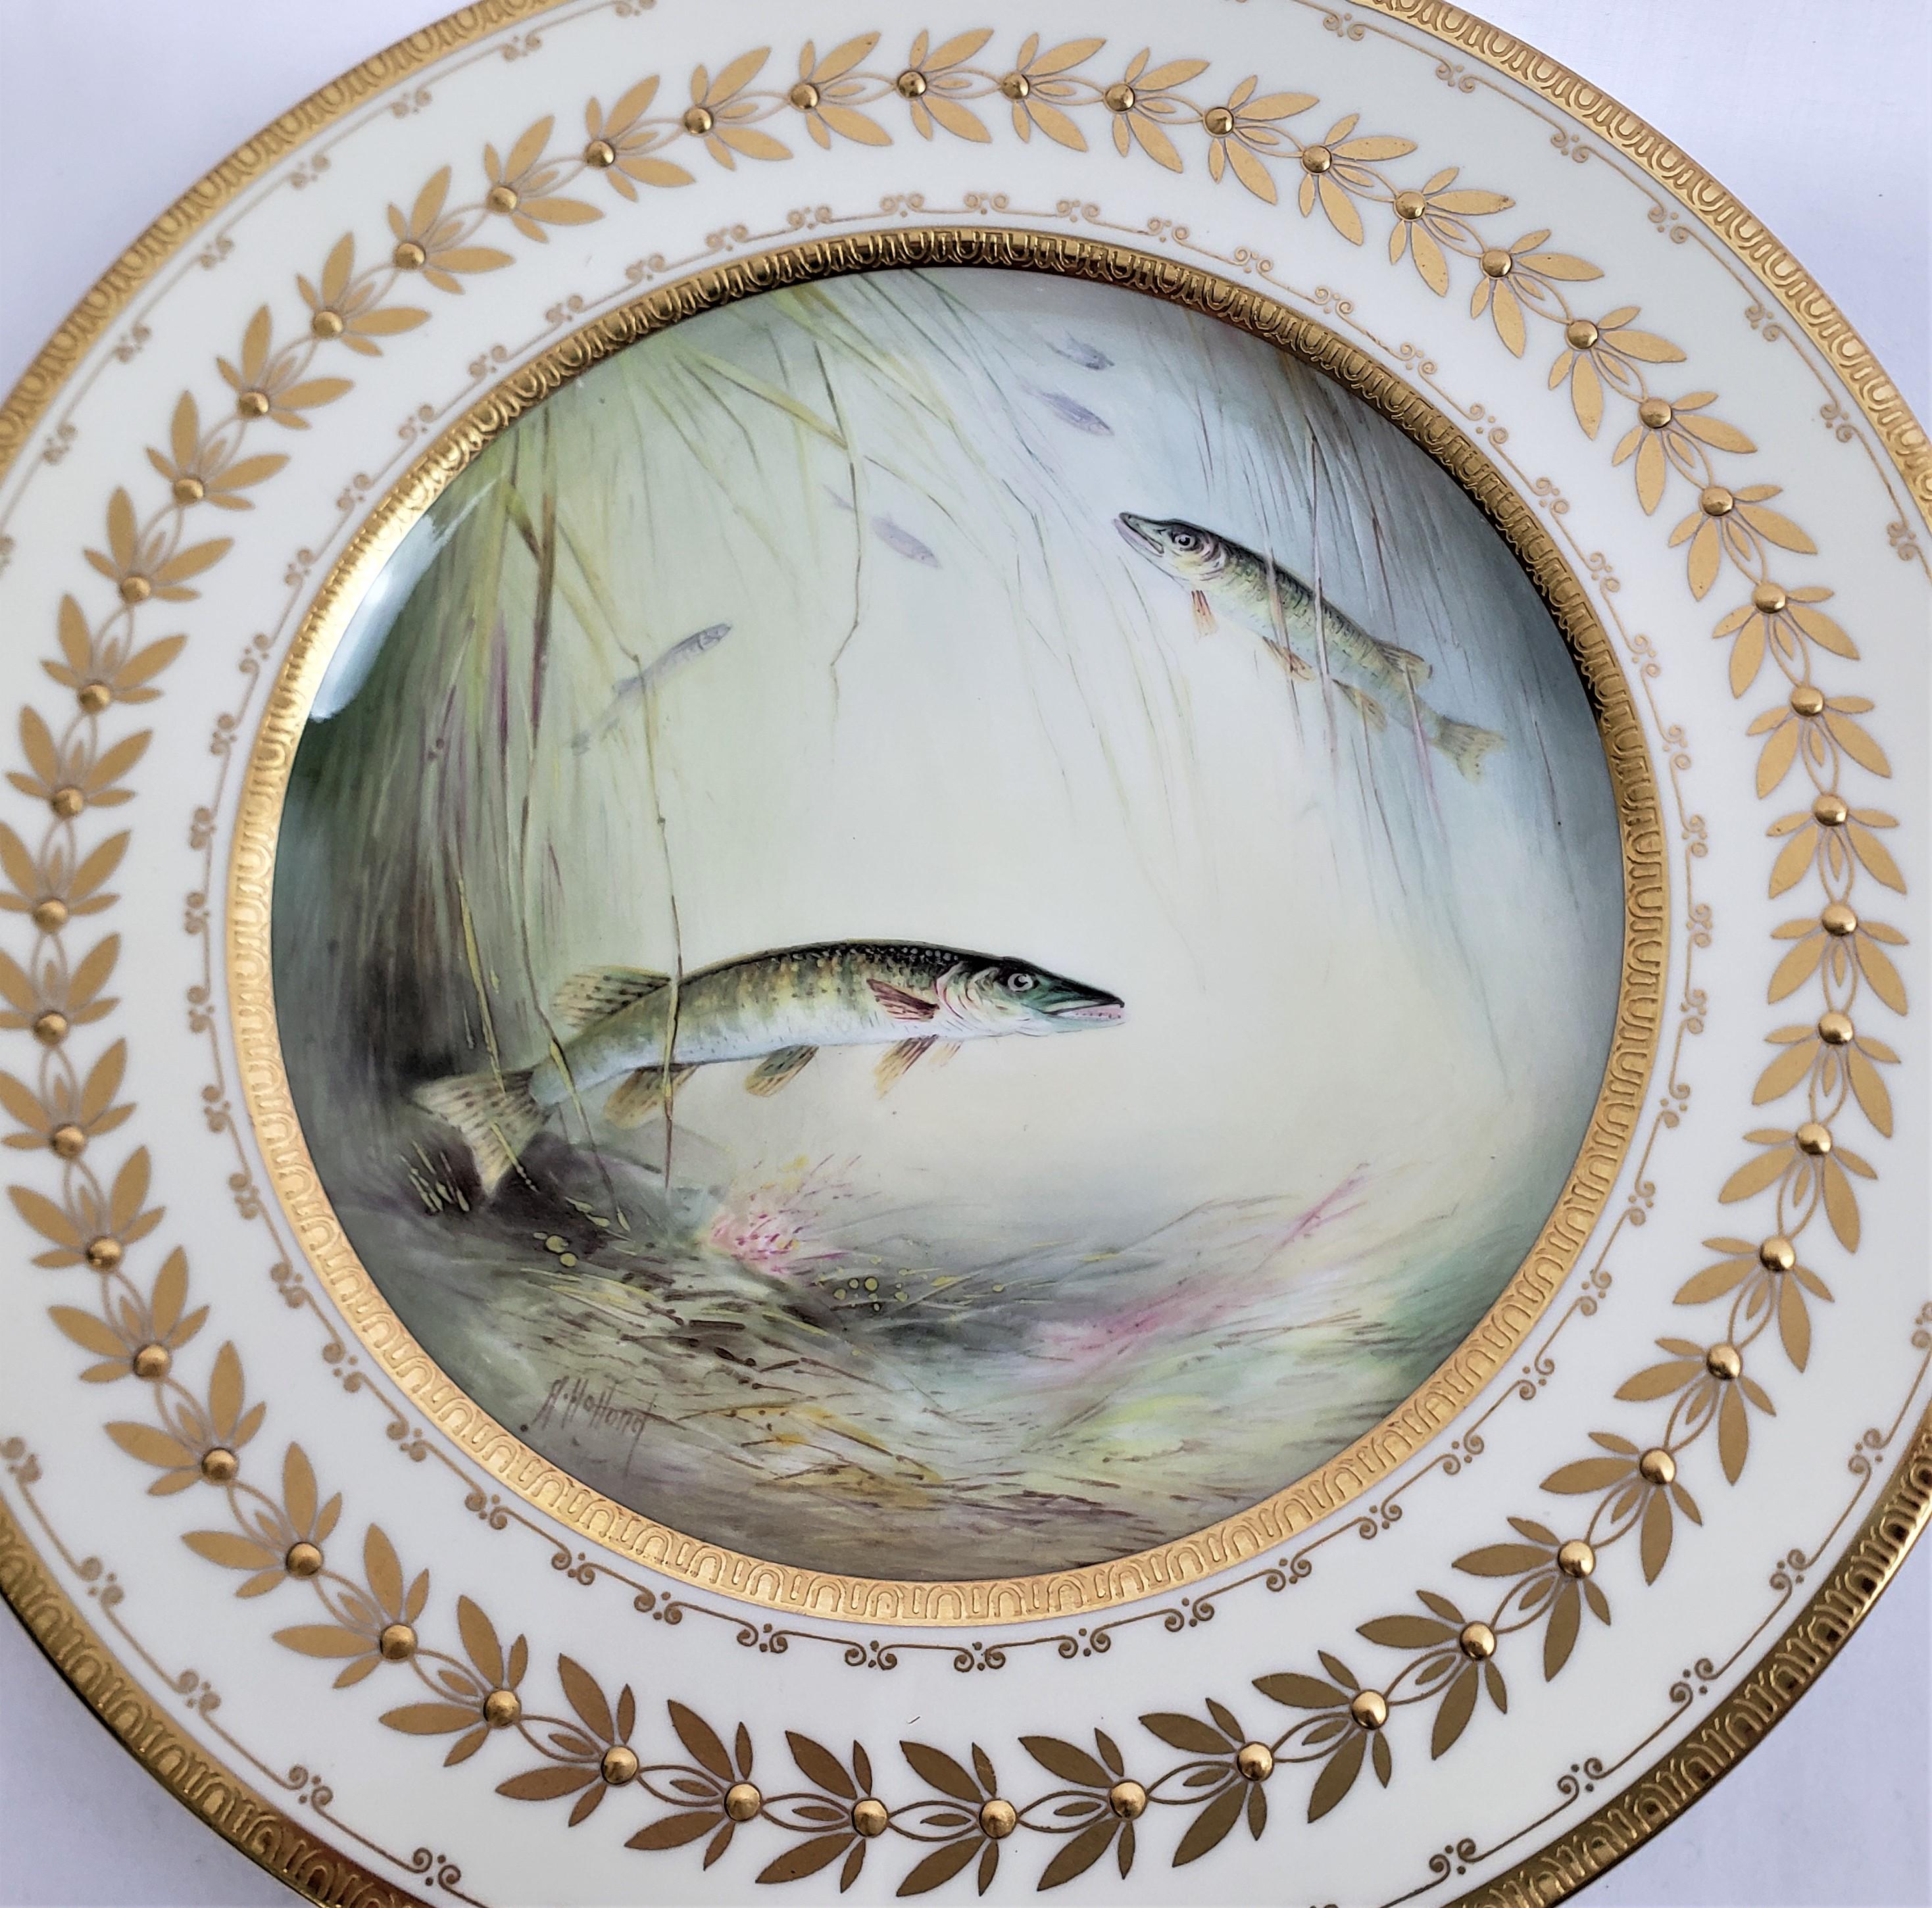 High Victorian 12 Antique Minton Hand-Painted Cabinet Plates Signed A. Holland Depicting Fish For Sale